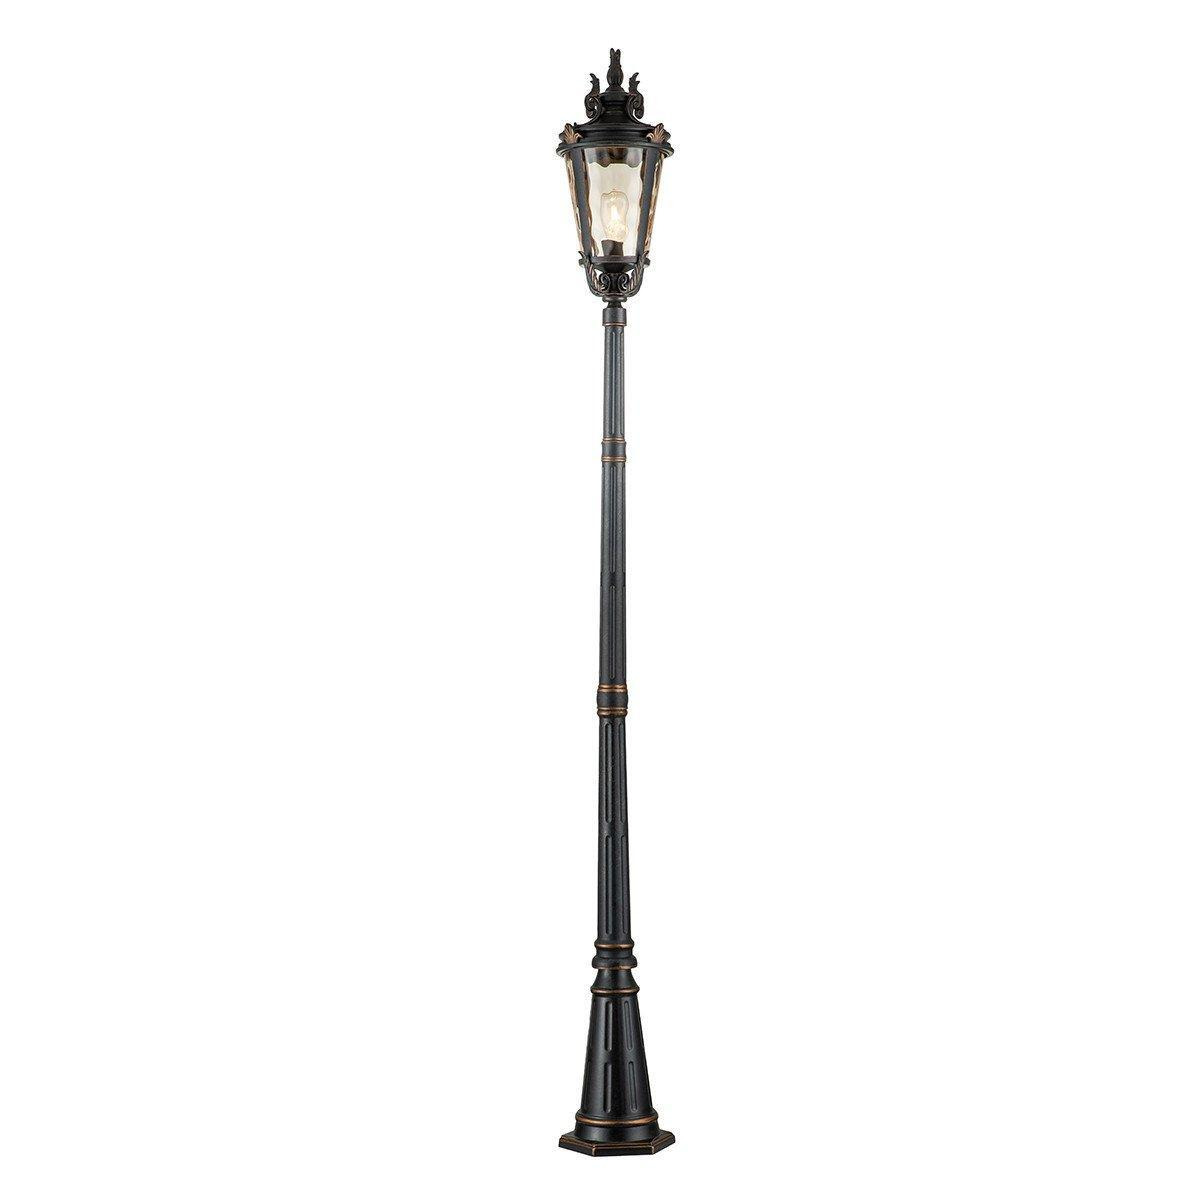 Baltimore 1 Light Large Outdoor Lamp Post Weathered Bronze IP44 E27 - image 1